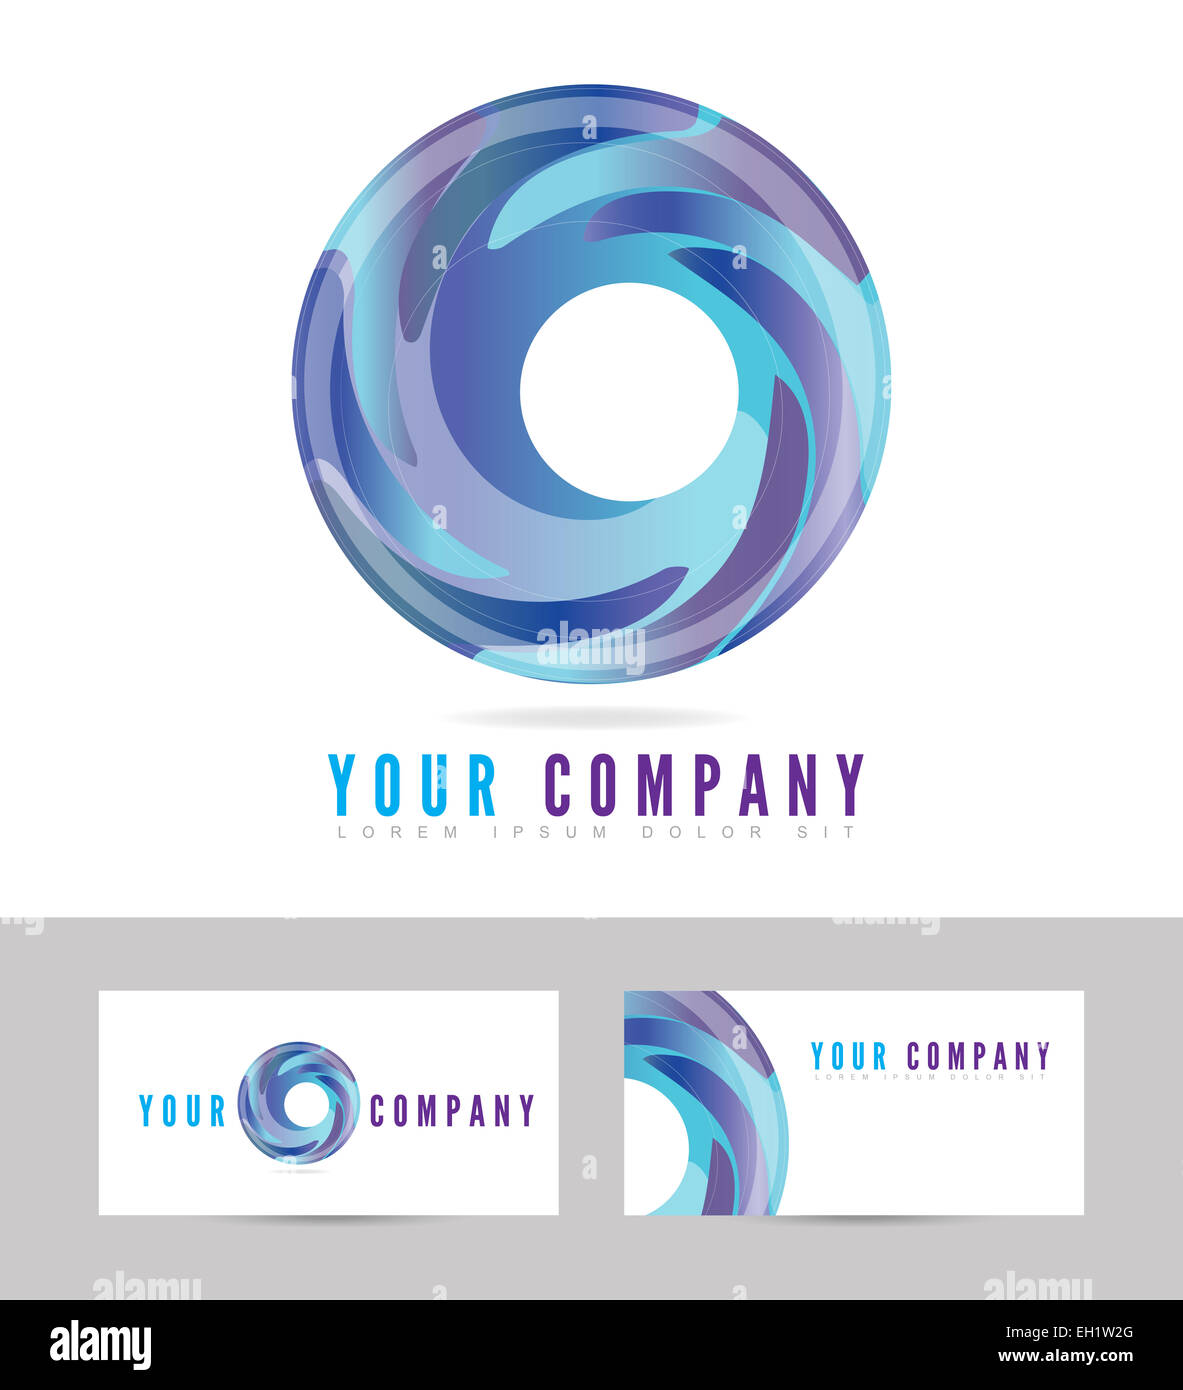 Blue business logo icon vector with business card template Stock Photo